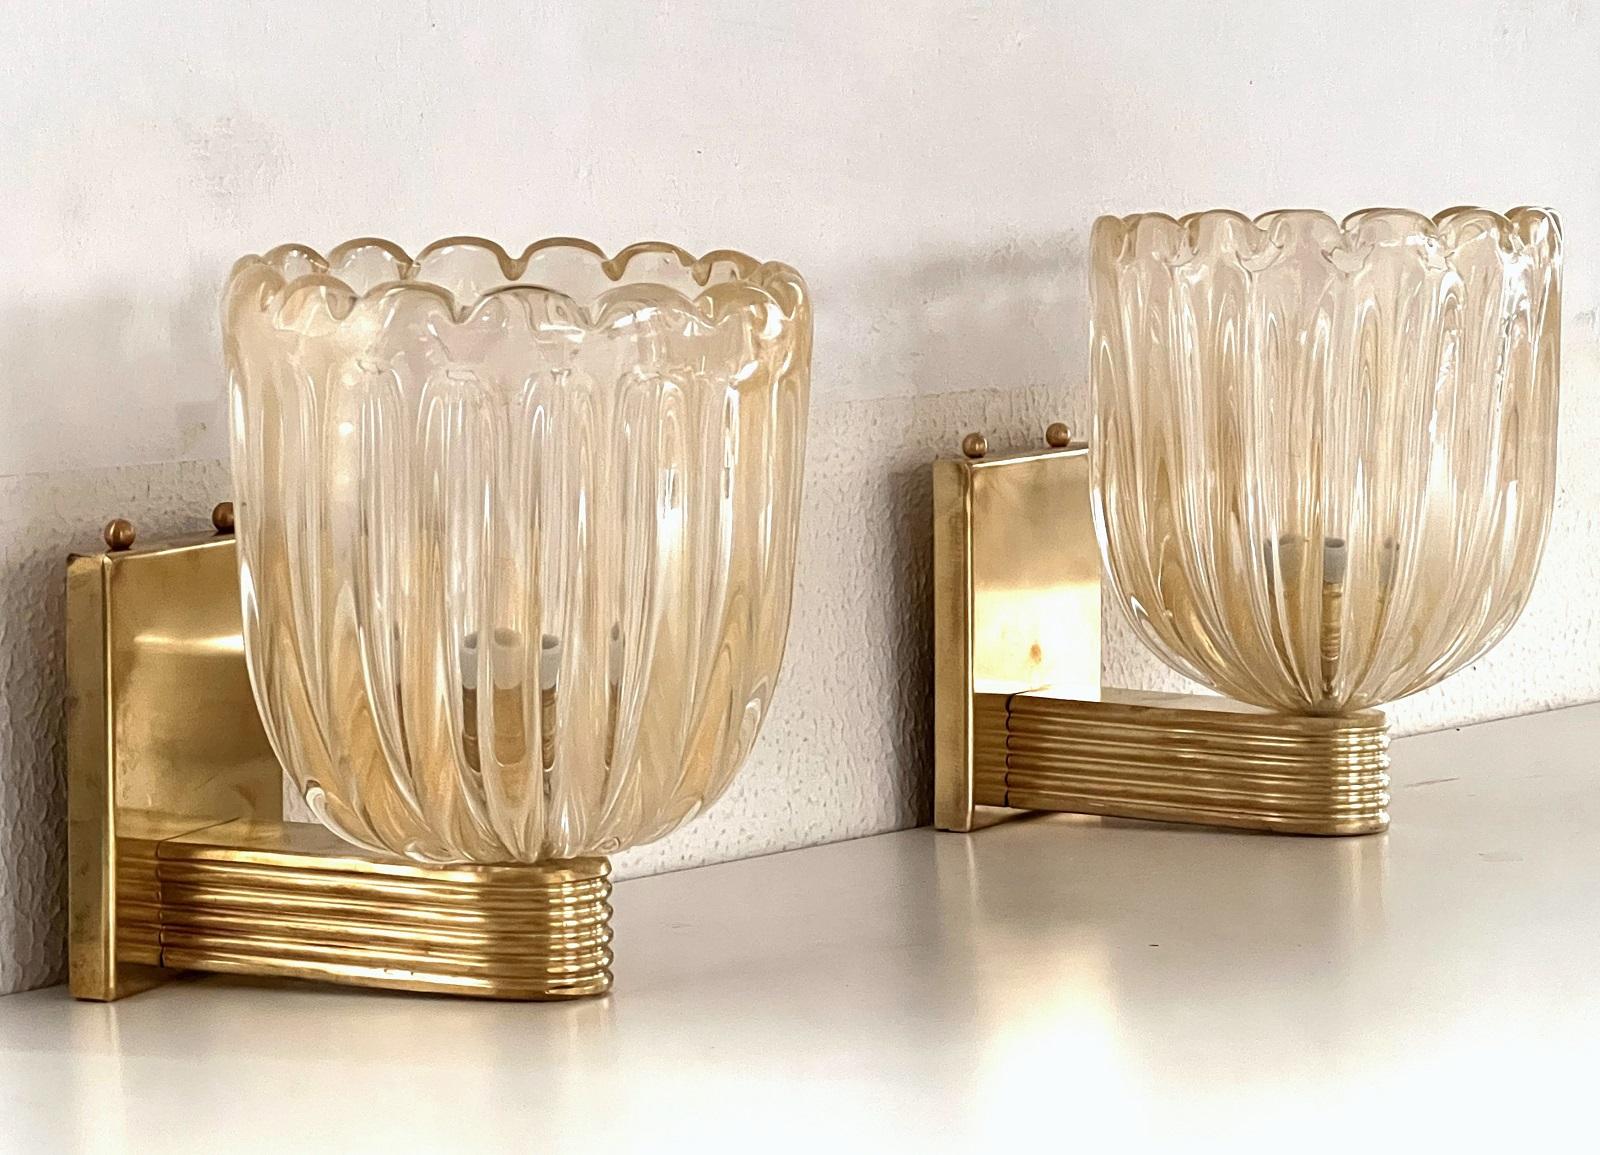 Italian Brass and Murano Glass Wall Lights or Sconces in Art Deco Style, 1990s For Sale 9